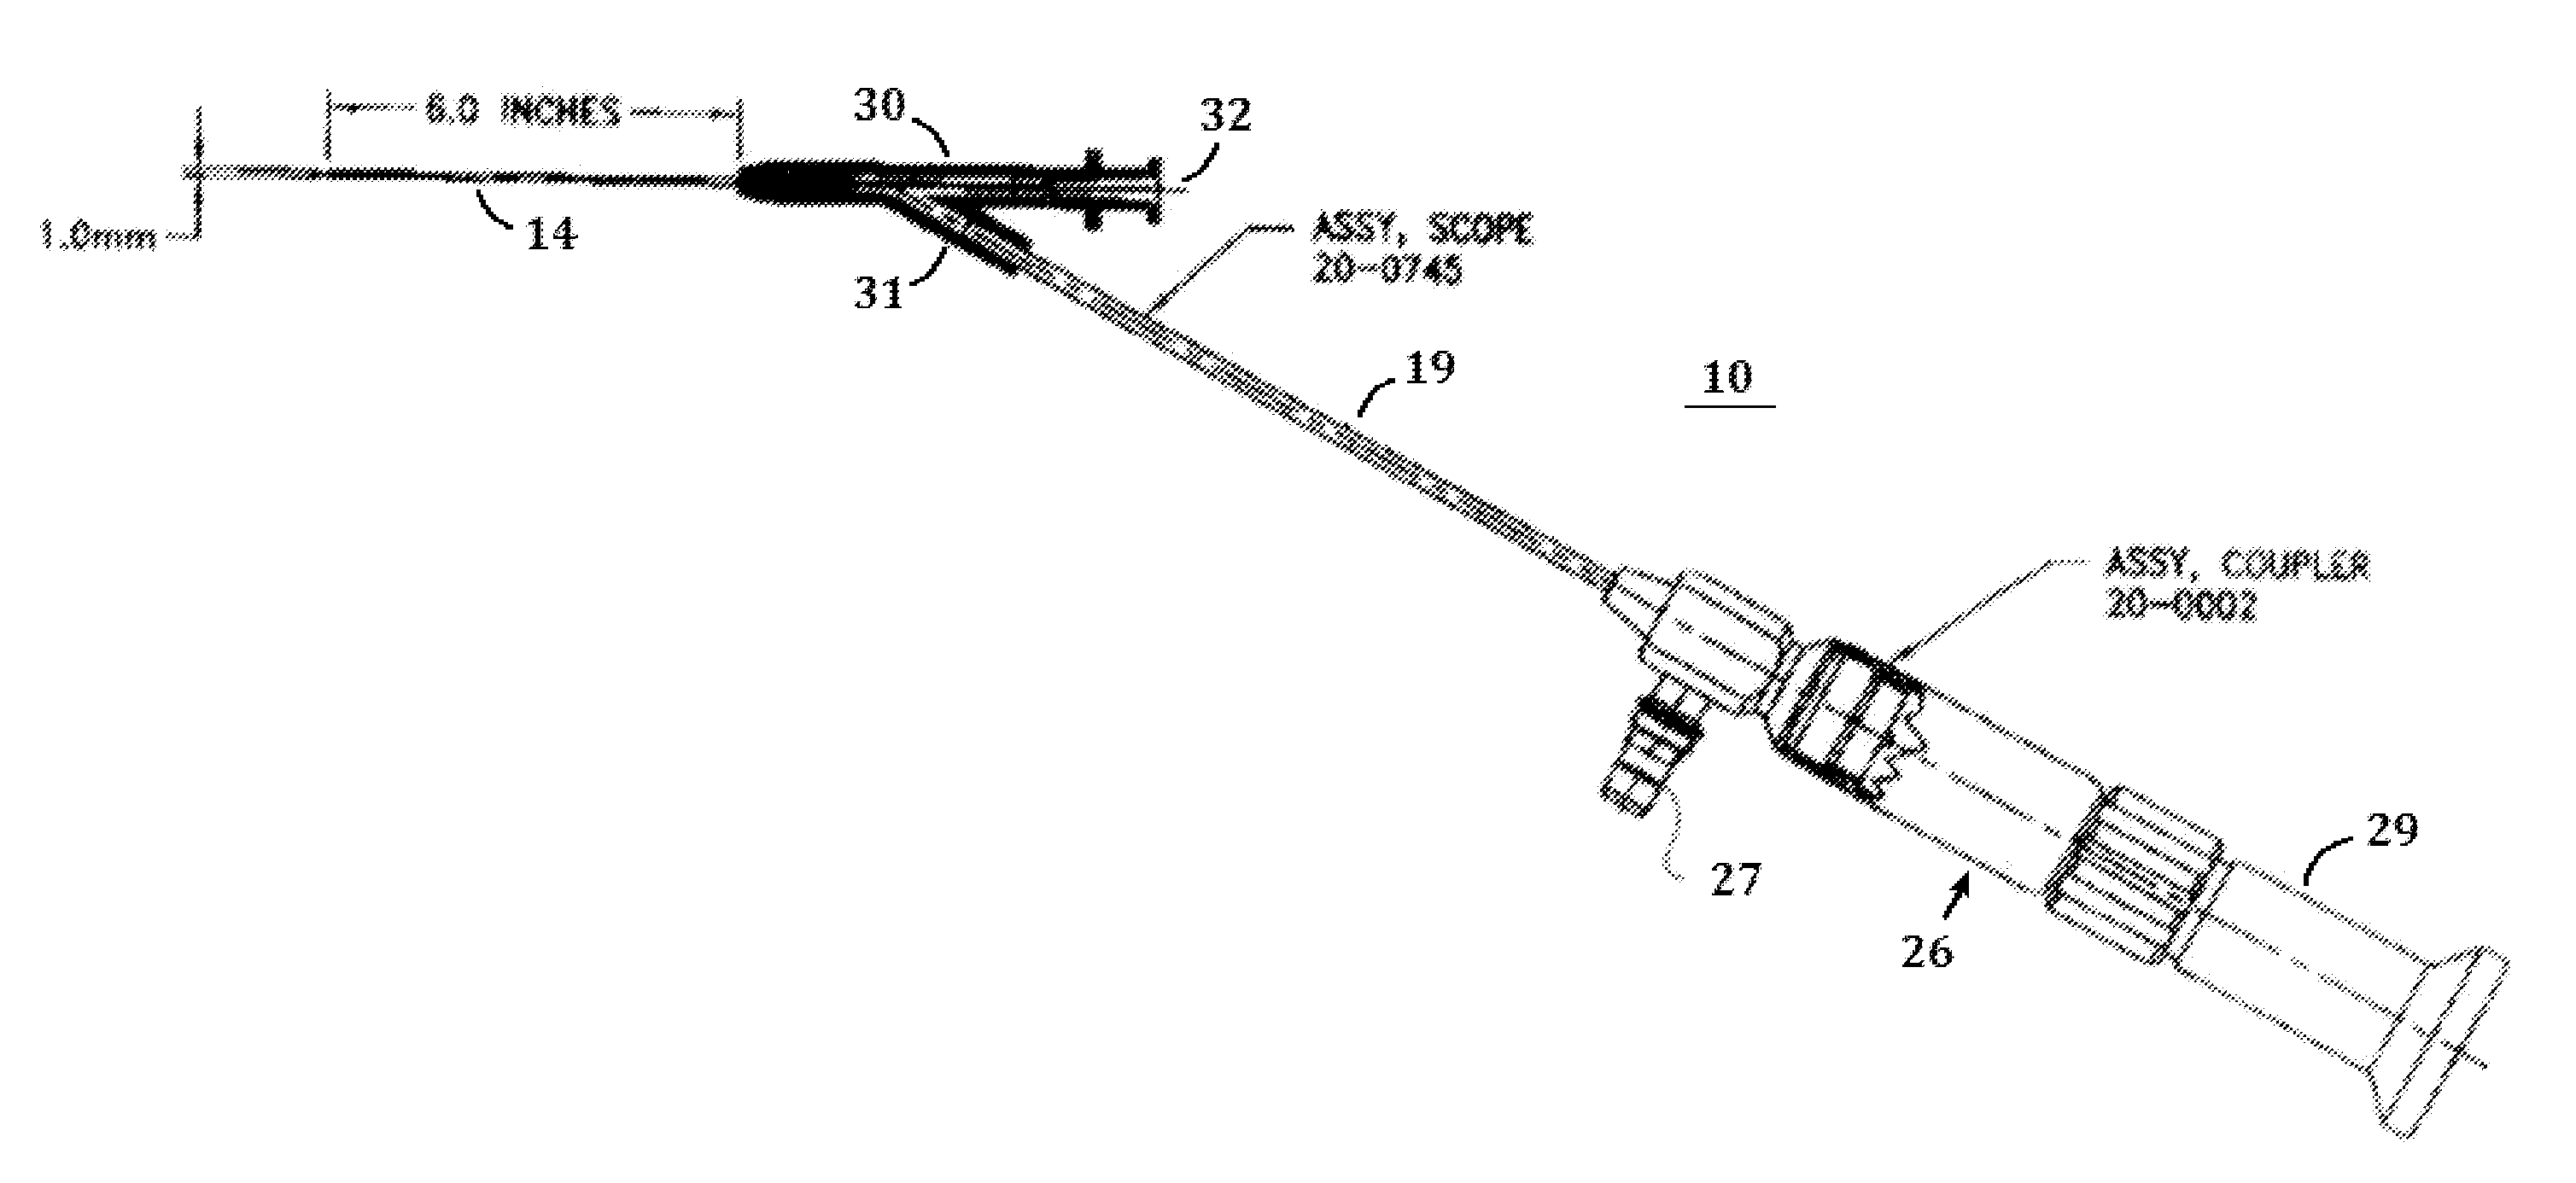 Microendoscope and methods of use